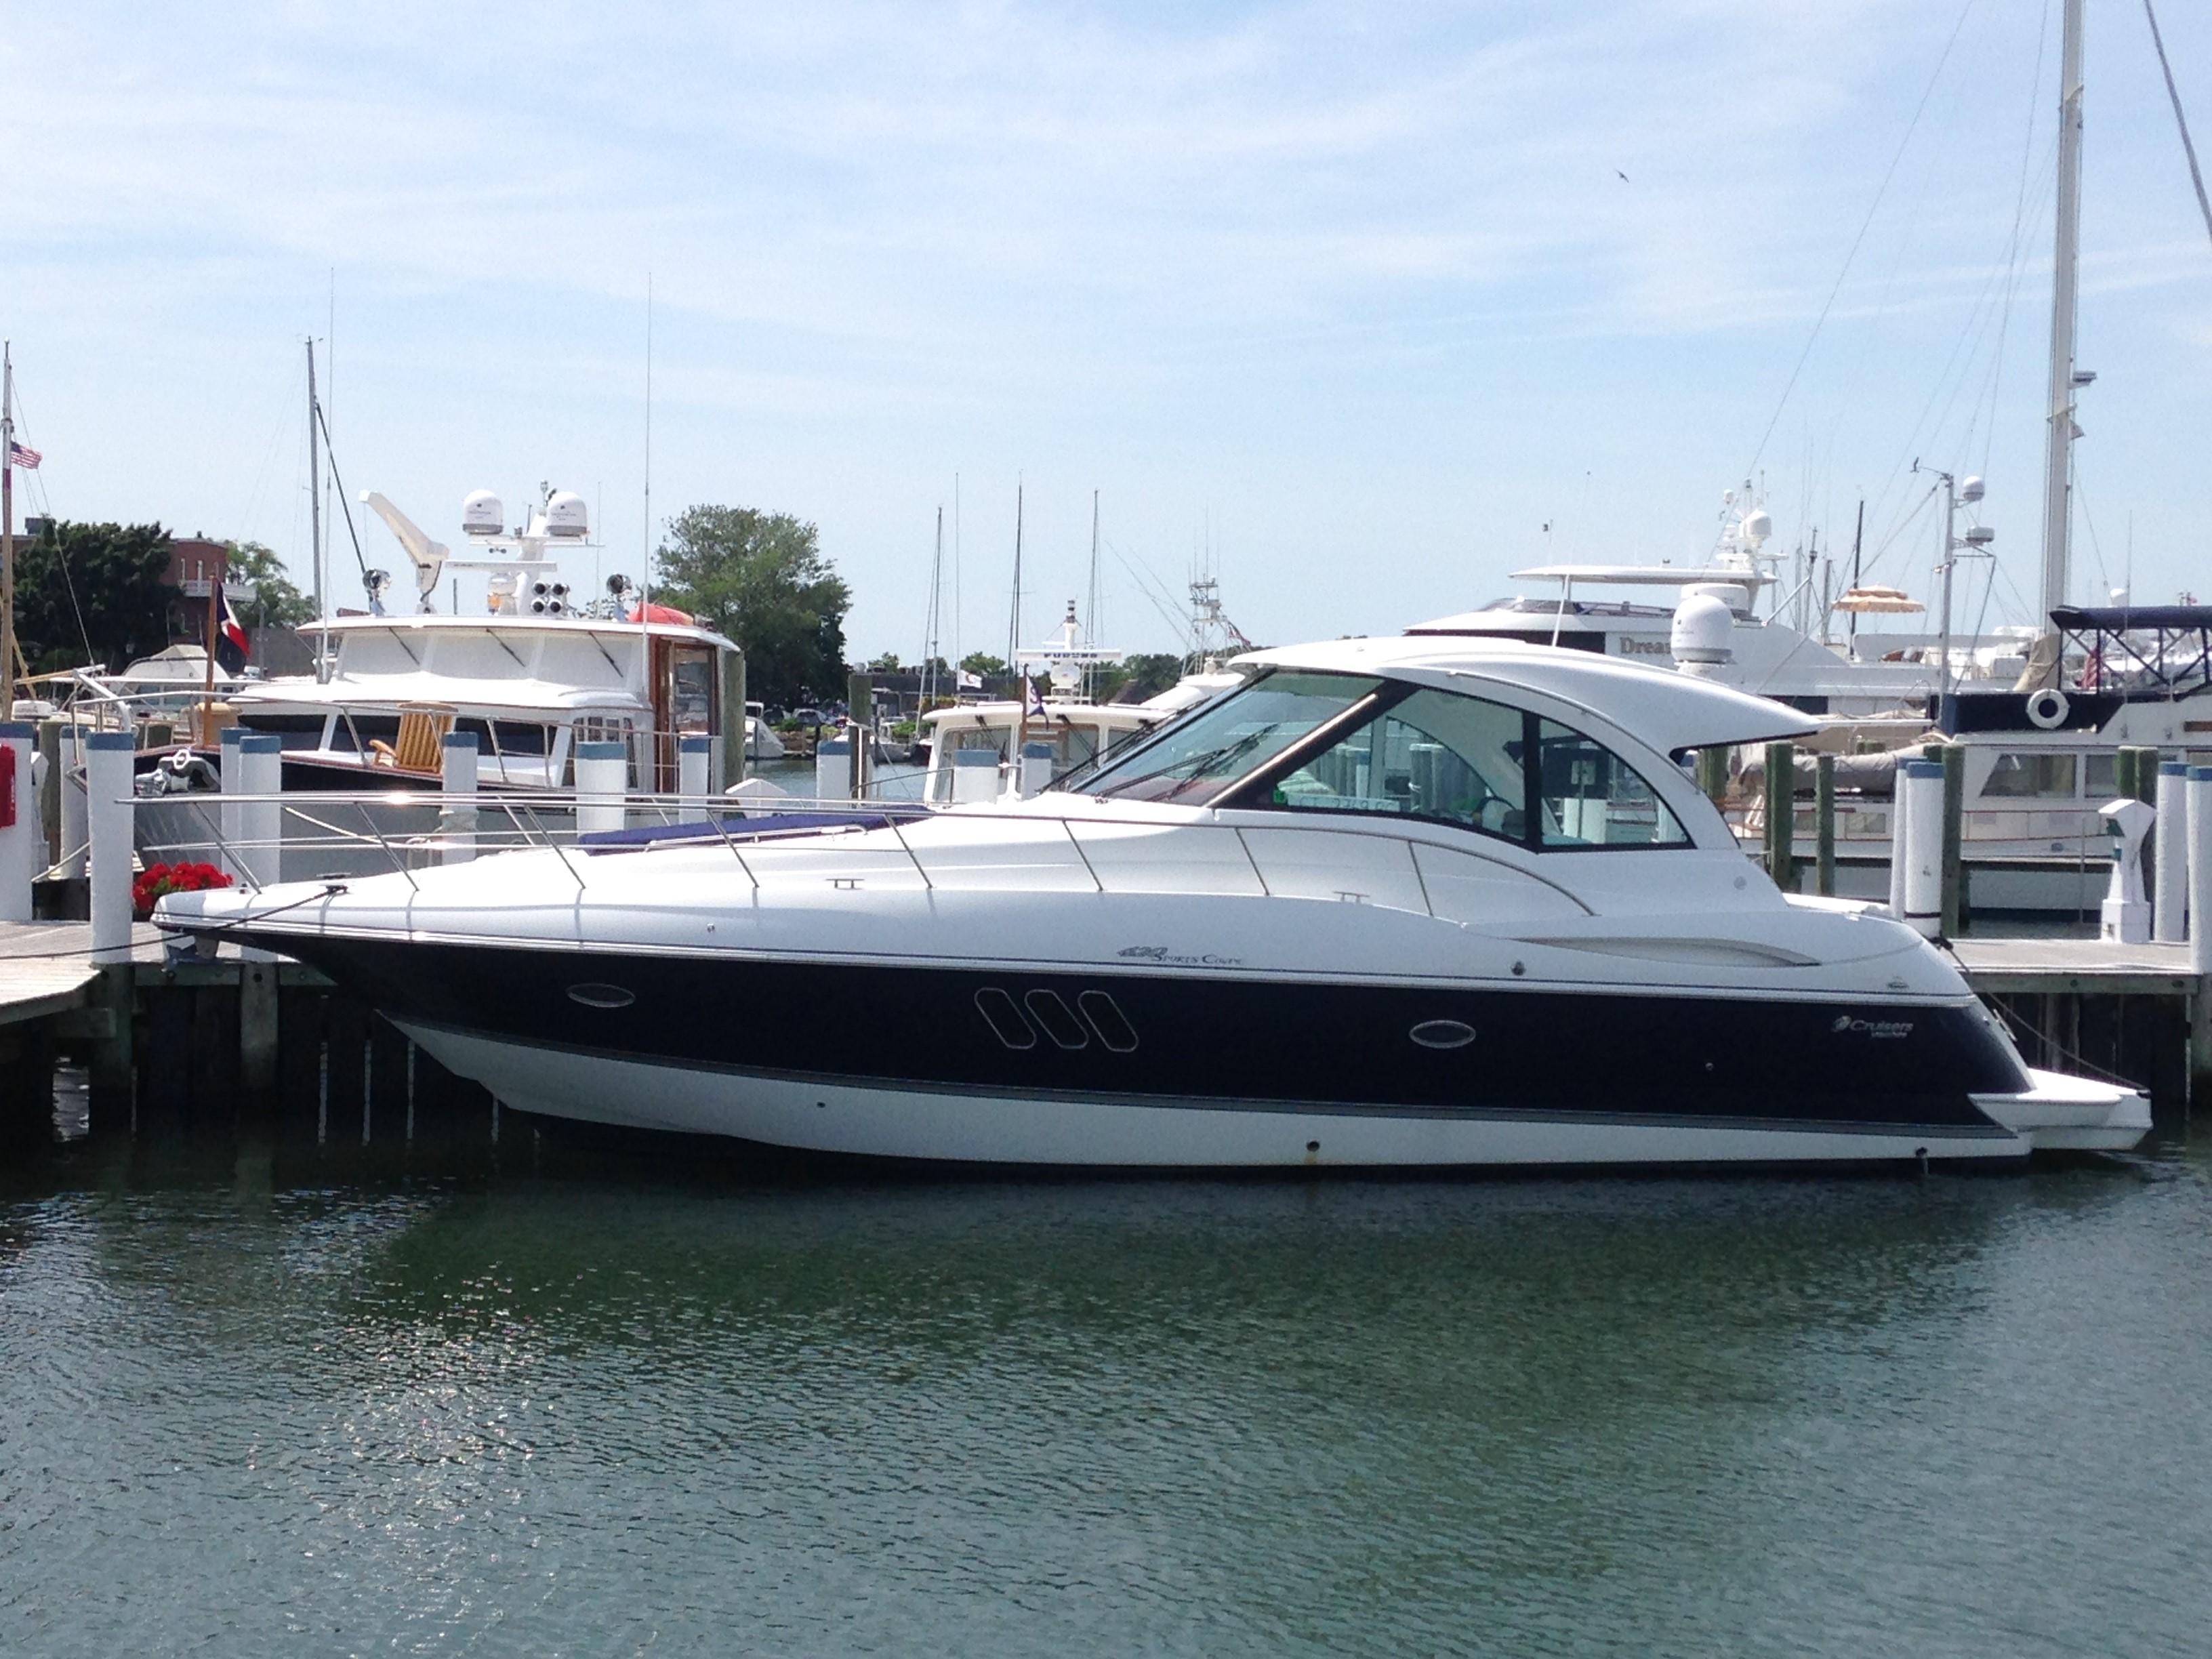 30 ft cruiser yacht for sale